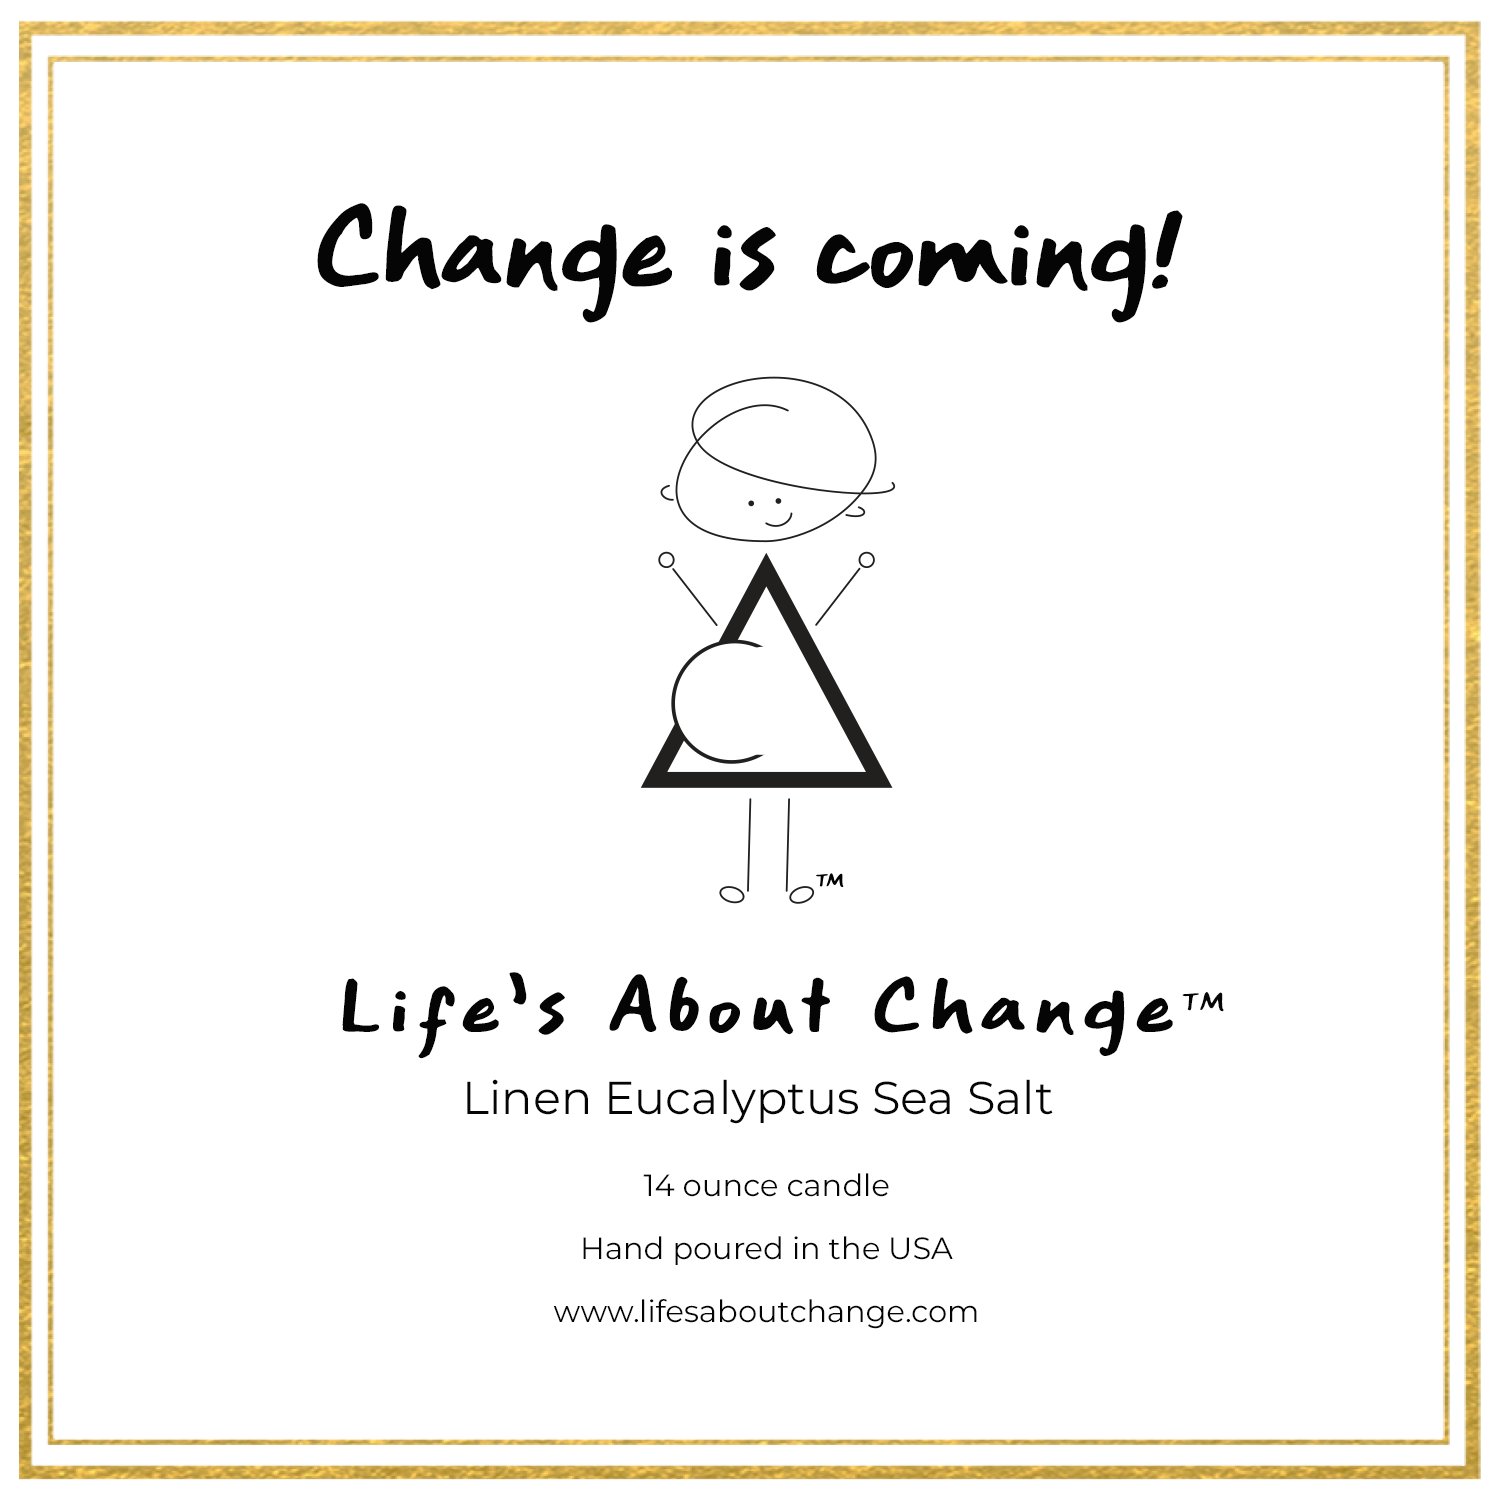 Change is coming!